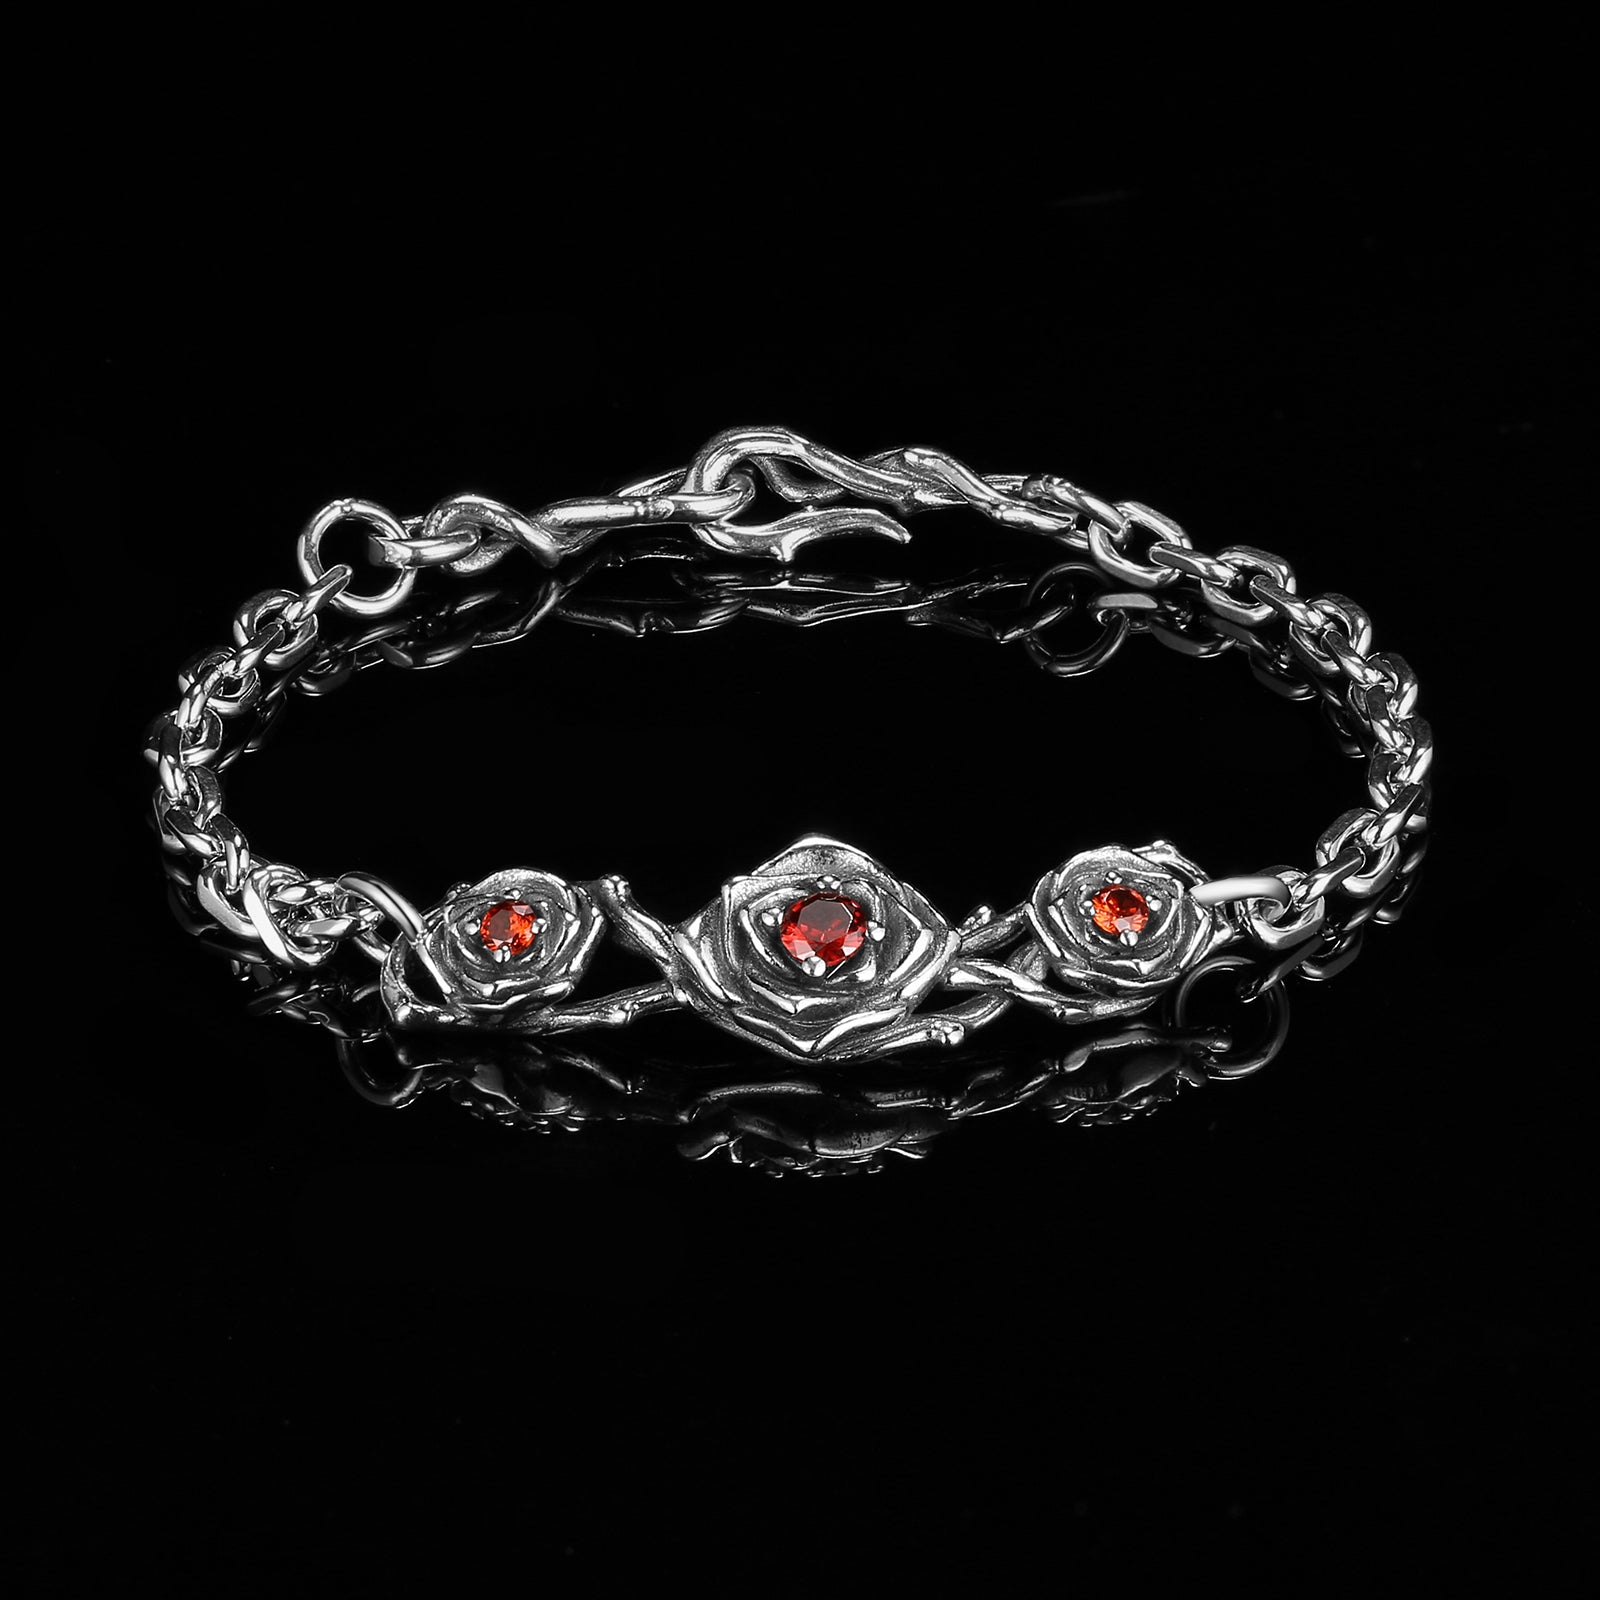 RED ROSES ARMBAND. - 925 SILBER